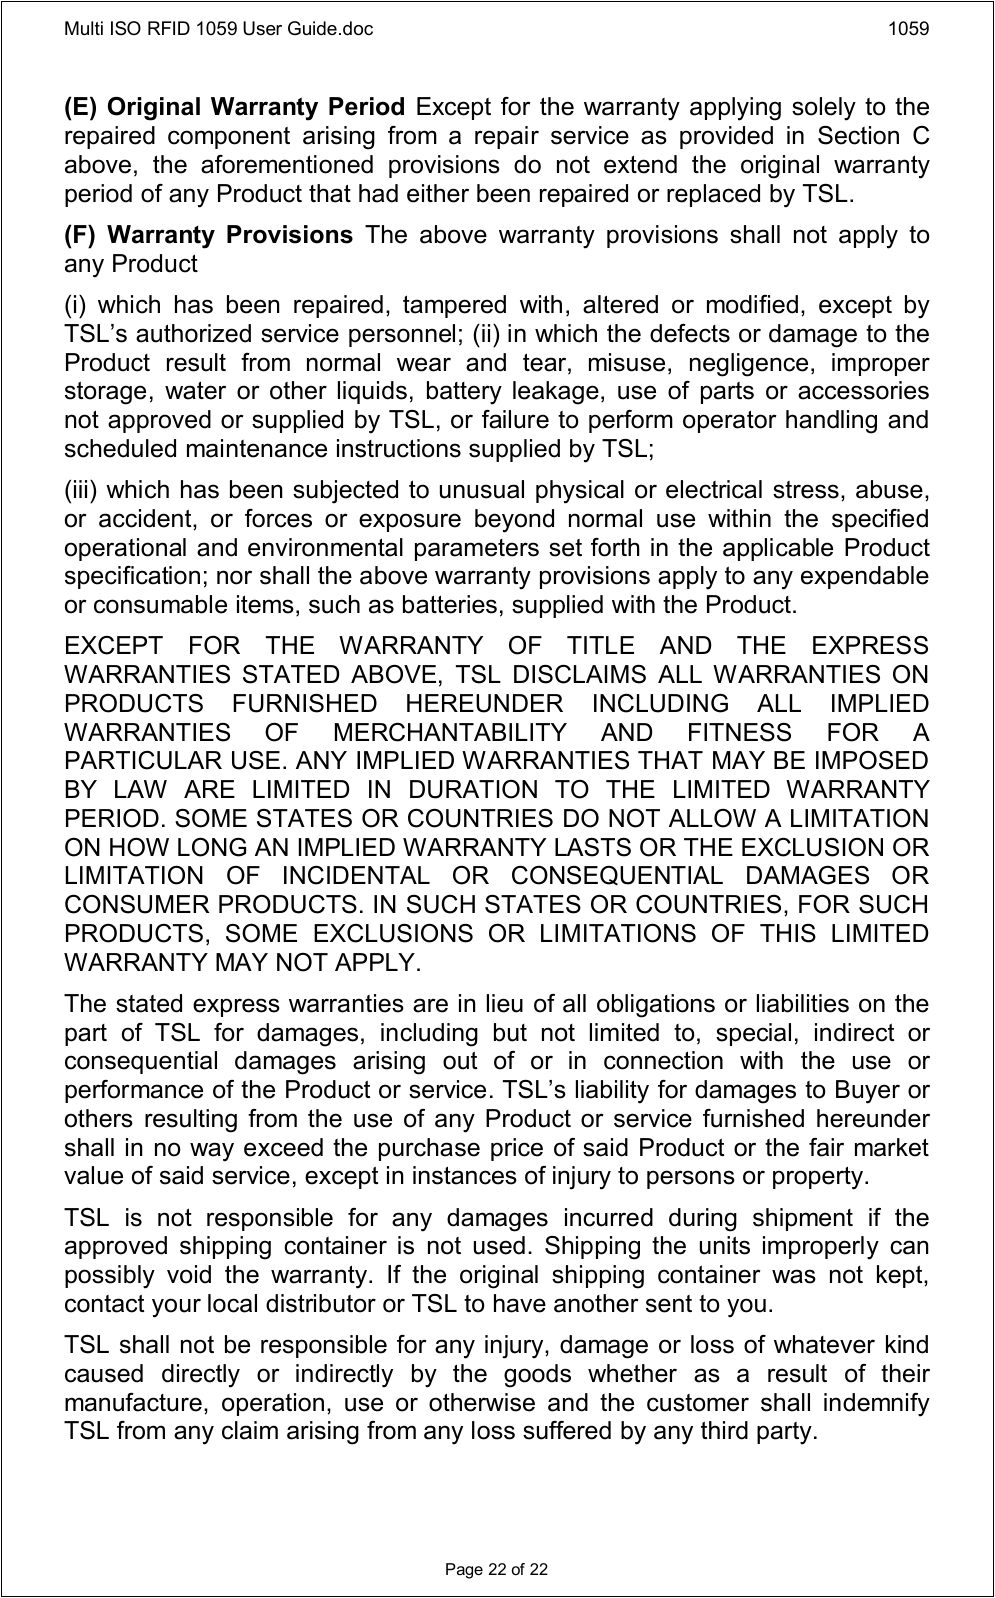 Multi ISO RFID 1059 User Guide.doc 1059Page 22 of 22(E) Original Warranty Period Except for the warranty applying solely to the repaired  component  arising  from  a  repair  service  as  provided  in  Section  C above,  the  aforementioned  provisions  do  not  extend  the  original  warranty period of any Product that had either been repaired or replaced by TSL.(F)  Warranty  Provisions  The  above  warranty  provisions  shall  not  apply  to any Product(i)  which  has  been  repaired,  tampered  with,  altered  or  modified,  except  by TSL’s authorized service personnel; (ii) in which the defects or damage to the Product  result  from  normal  wear  and  tear,  misuse,  negligence,  improper storage,  water  or other liquids,  battery leakage, use of  parts  or accessories not approved or supplied by TSL, or failure to perform operator handling and scheduled maintenance instructions supplied by TSL;(iii) which has been subjected to unusual physical or electrical stress, abuse, or  accident,  or  forces  or  exposure  beyond  normal  use  within  the  specified operational and environmental parameters set forth in the applicable Product specification; nor shall the above warranty provisions apply to any expendable or consumable items, such as batteries, supplied with the Product.EXCEPT  FOR  THE  WARRANTY  OF  TITLE  AND  THE  EXPRESS WARRANTIES  STATED  ABOVE,  TSL  DISCLAIMS  ALL  WARRANTIES  ON PRODUCTS  FURNISHED  HEREUNDER  INCLUDING  ALL  IMPLIED WARRANTIES  OF  MERCHANTABILITY  AND  FITNESS  FOR  A PARTICULAR USE. ANY IMPLIED WARRANTIES THAT MAY BE IMPOSED BY  LAW  ARE  LIMITED  IN  DURATION  TO  THE  LIMITED  WARRANTY PERIOD. SOME STATES OR COUNTRIES DO NOT ALLOW A LIMITATION ON HOW LONG AN IMPLIED WARRANTY LASTS OR THE EXCLUSION OR LIMITATION  OF  INCIDENTAL  OR  CONSEQUENTIAL  DAMAGES  OR CONSUMER PRODUCTS. IN SUCH STATES OR COUNTRIES, FOR SUCH PRODUCTS,  SOME  EXCLUSIONS  OR  LIMITATIONS  OF  THIS  LIMITED WARRANTY MAY NOT APPLY.The stated express warranties are in lieu of all obligations or liabilities on the part  of  TSL  for  damages,  including  but  not  limited  to,  special,  indirect  or consequential  damages  arising  out  of  or  in  connection  with  the  use  or performance of the Product or service. TSL’s liability for damages to Buyer or others  resulting from the use of  any Product or service  furnished hereunder shall in no way exceed the purchase price of said Product or the fair market value of said service, except in instances of injury to persons or property.TSL  is  not  responsible  for  any  damages  incurred  during  shipment  if  the approved  shipping  container  is  not  used.  Shipping  the  units improperly  can possibly  void  the  warranty.  If  the  original  shipping  container  was  not  kept, contact your local distributor or TSL to have another sent to you.TSL shall not be responsible for any injury, damage or loss of whatever kind caused  directly  or  indirectly  by  the  goods  whether  as  a  result  of  their manufacture,  operation,  use  or  otherwise  and  the  customer  shall  indemnify TSL from any claim arising from any loss suffered by any third party.